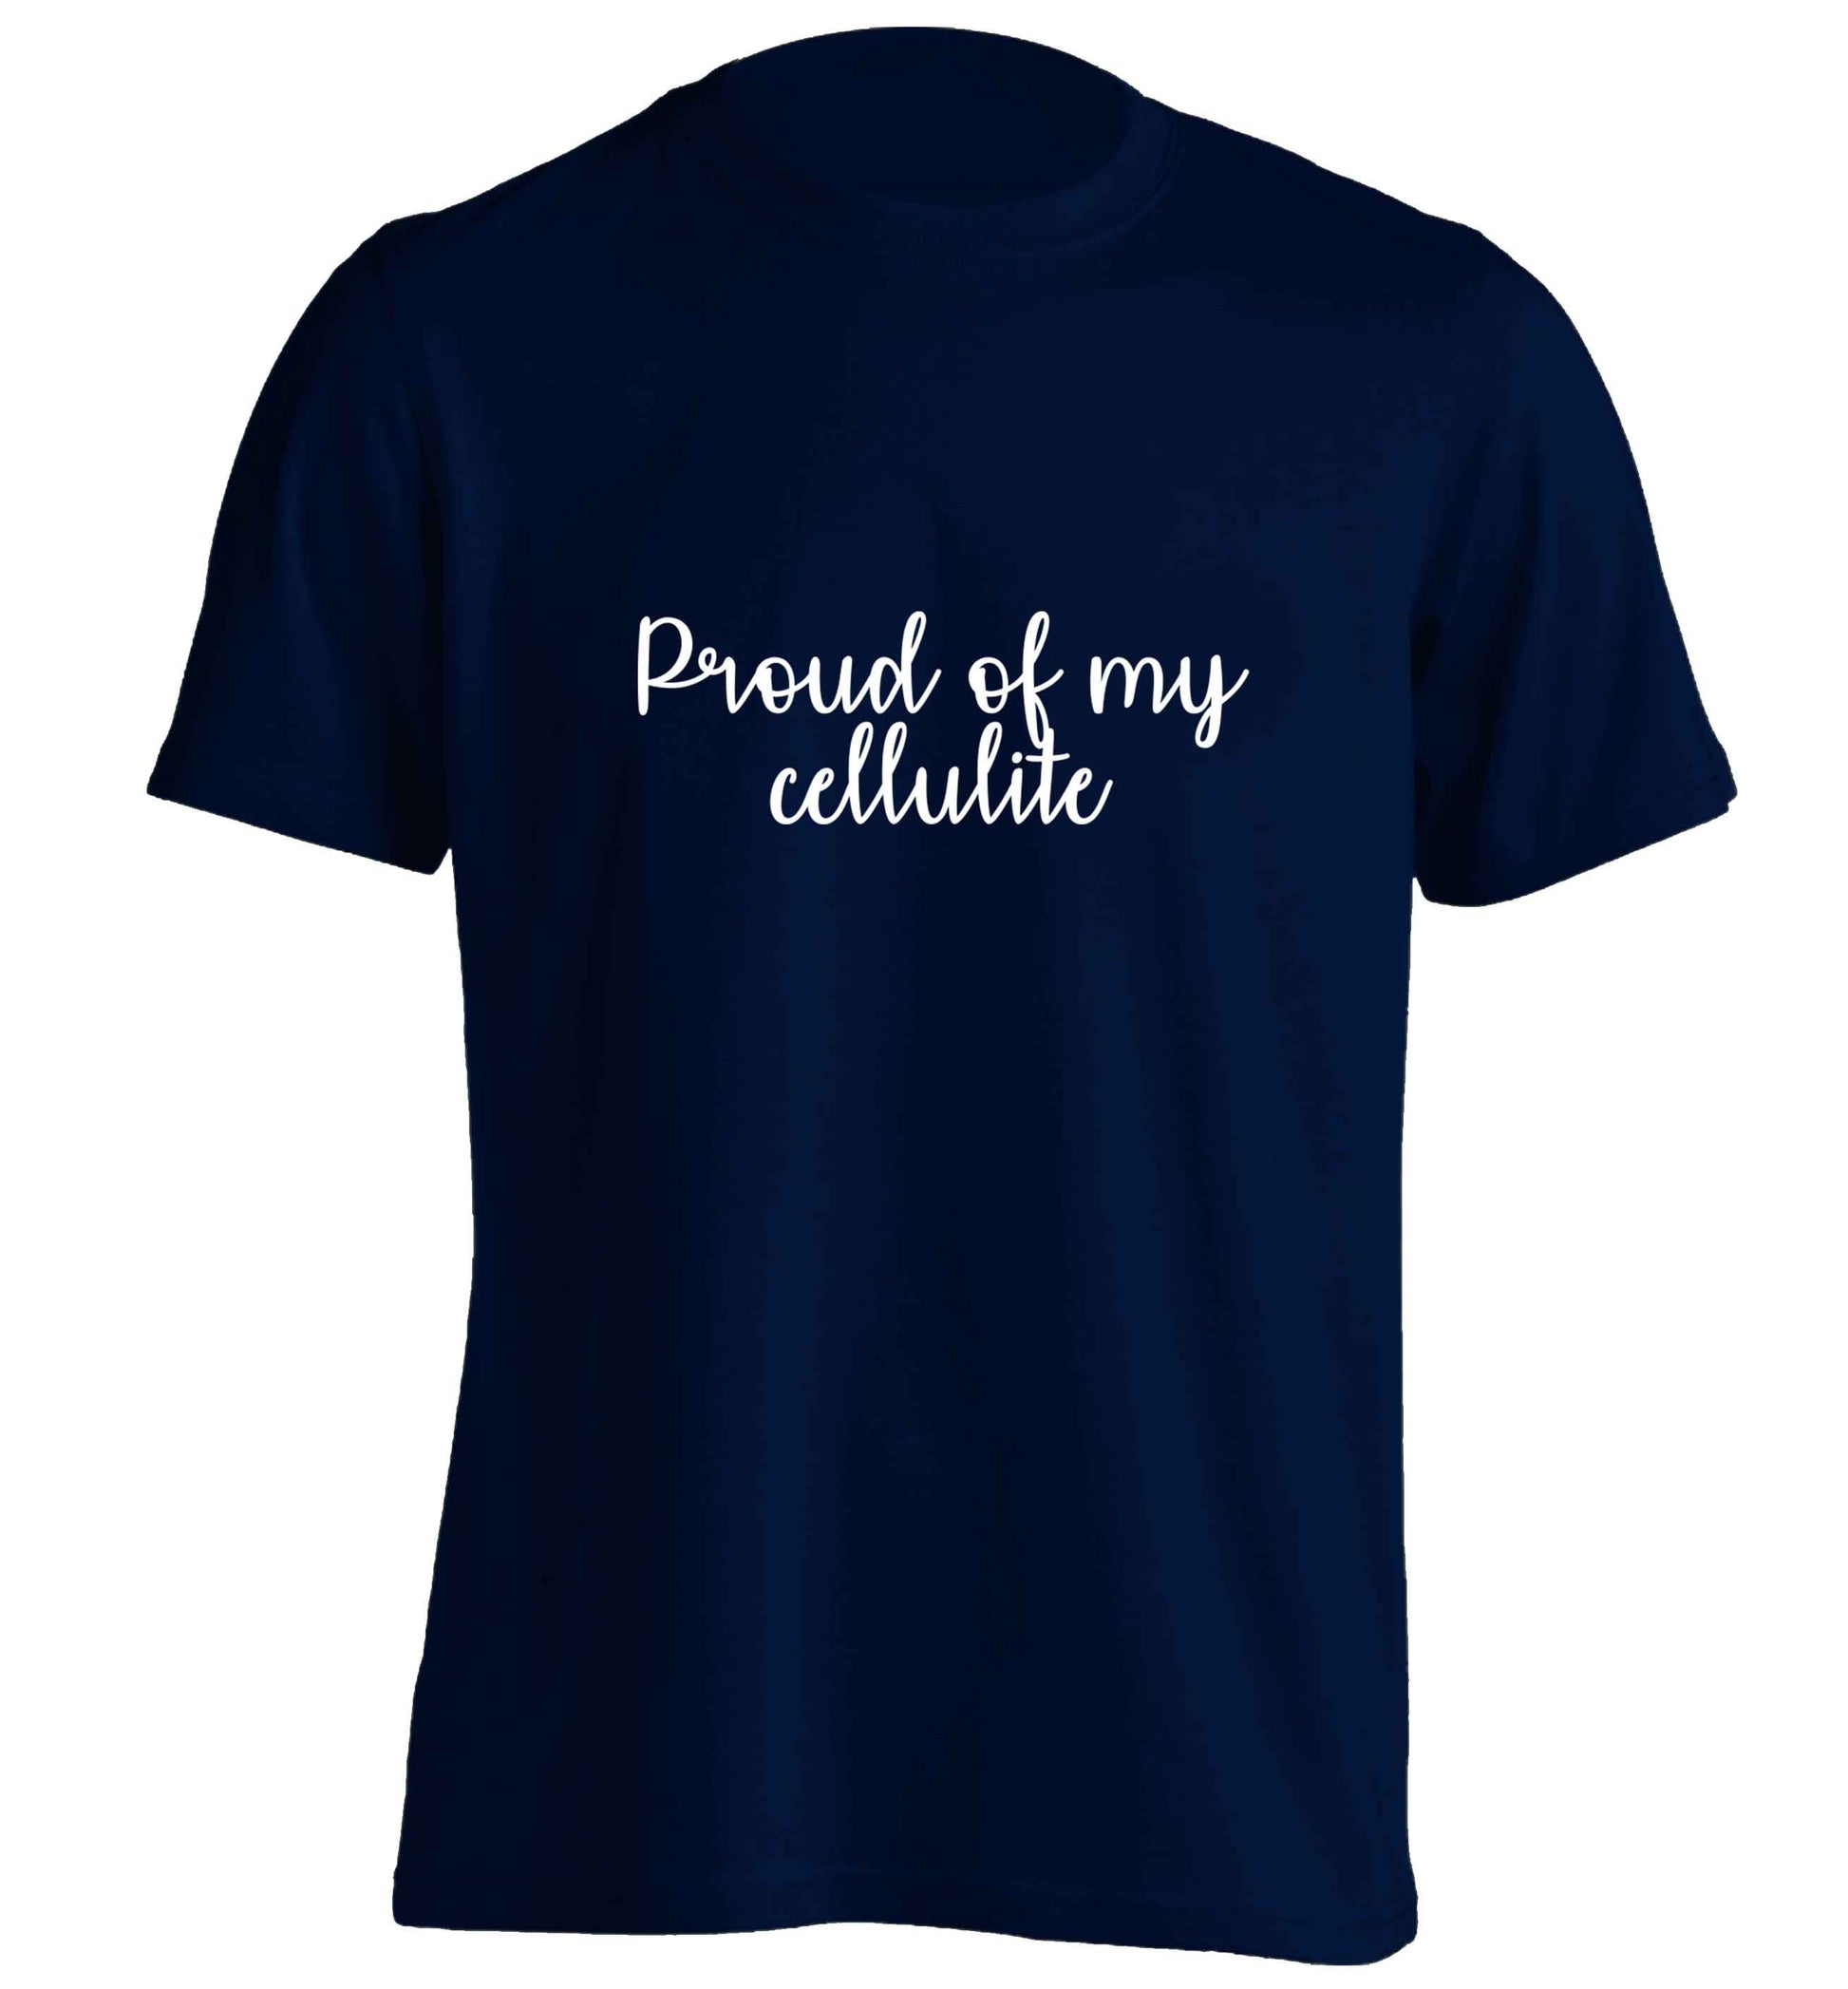 Proud of my cellulite adults unisex navy Tshirt 2XL